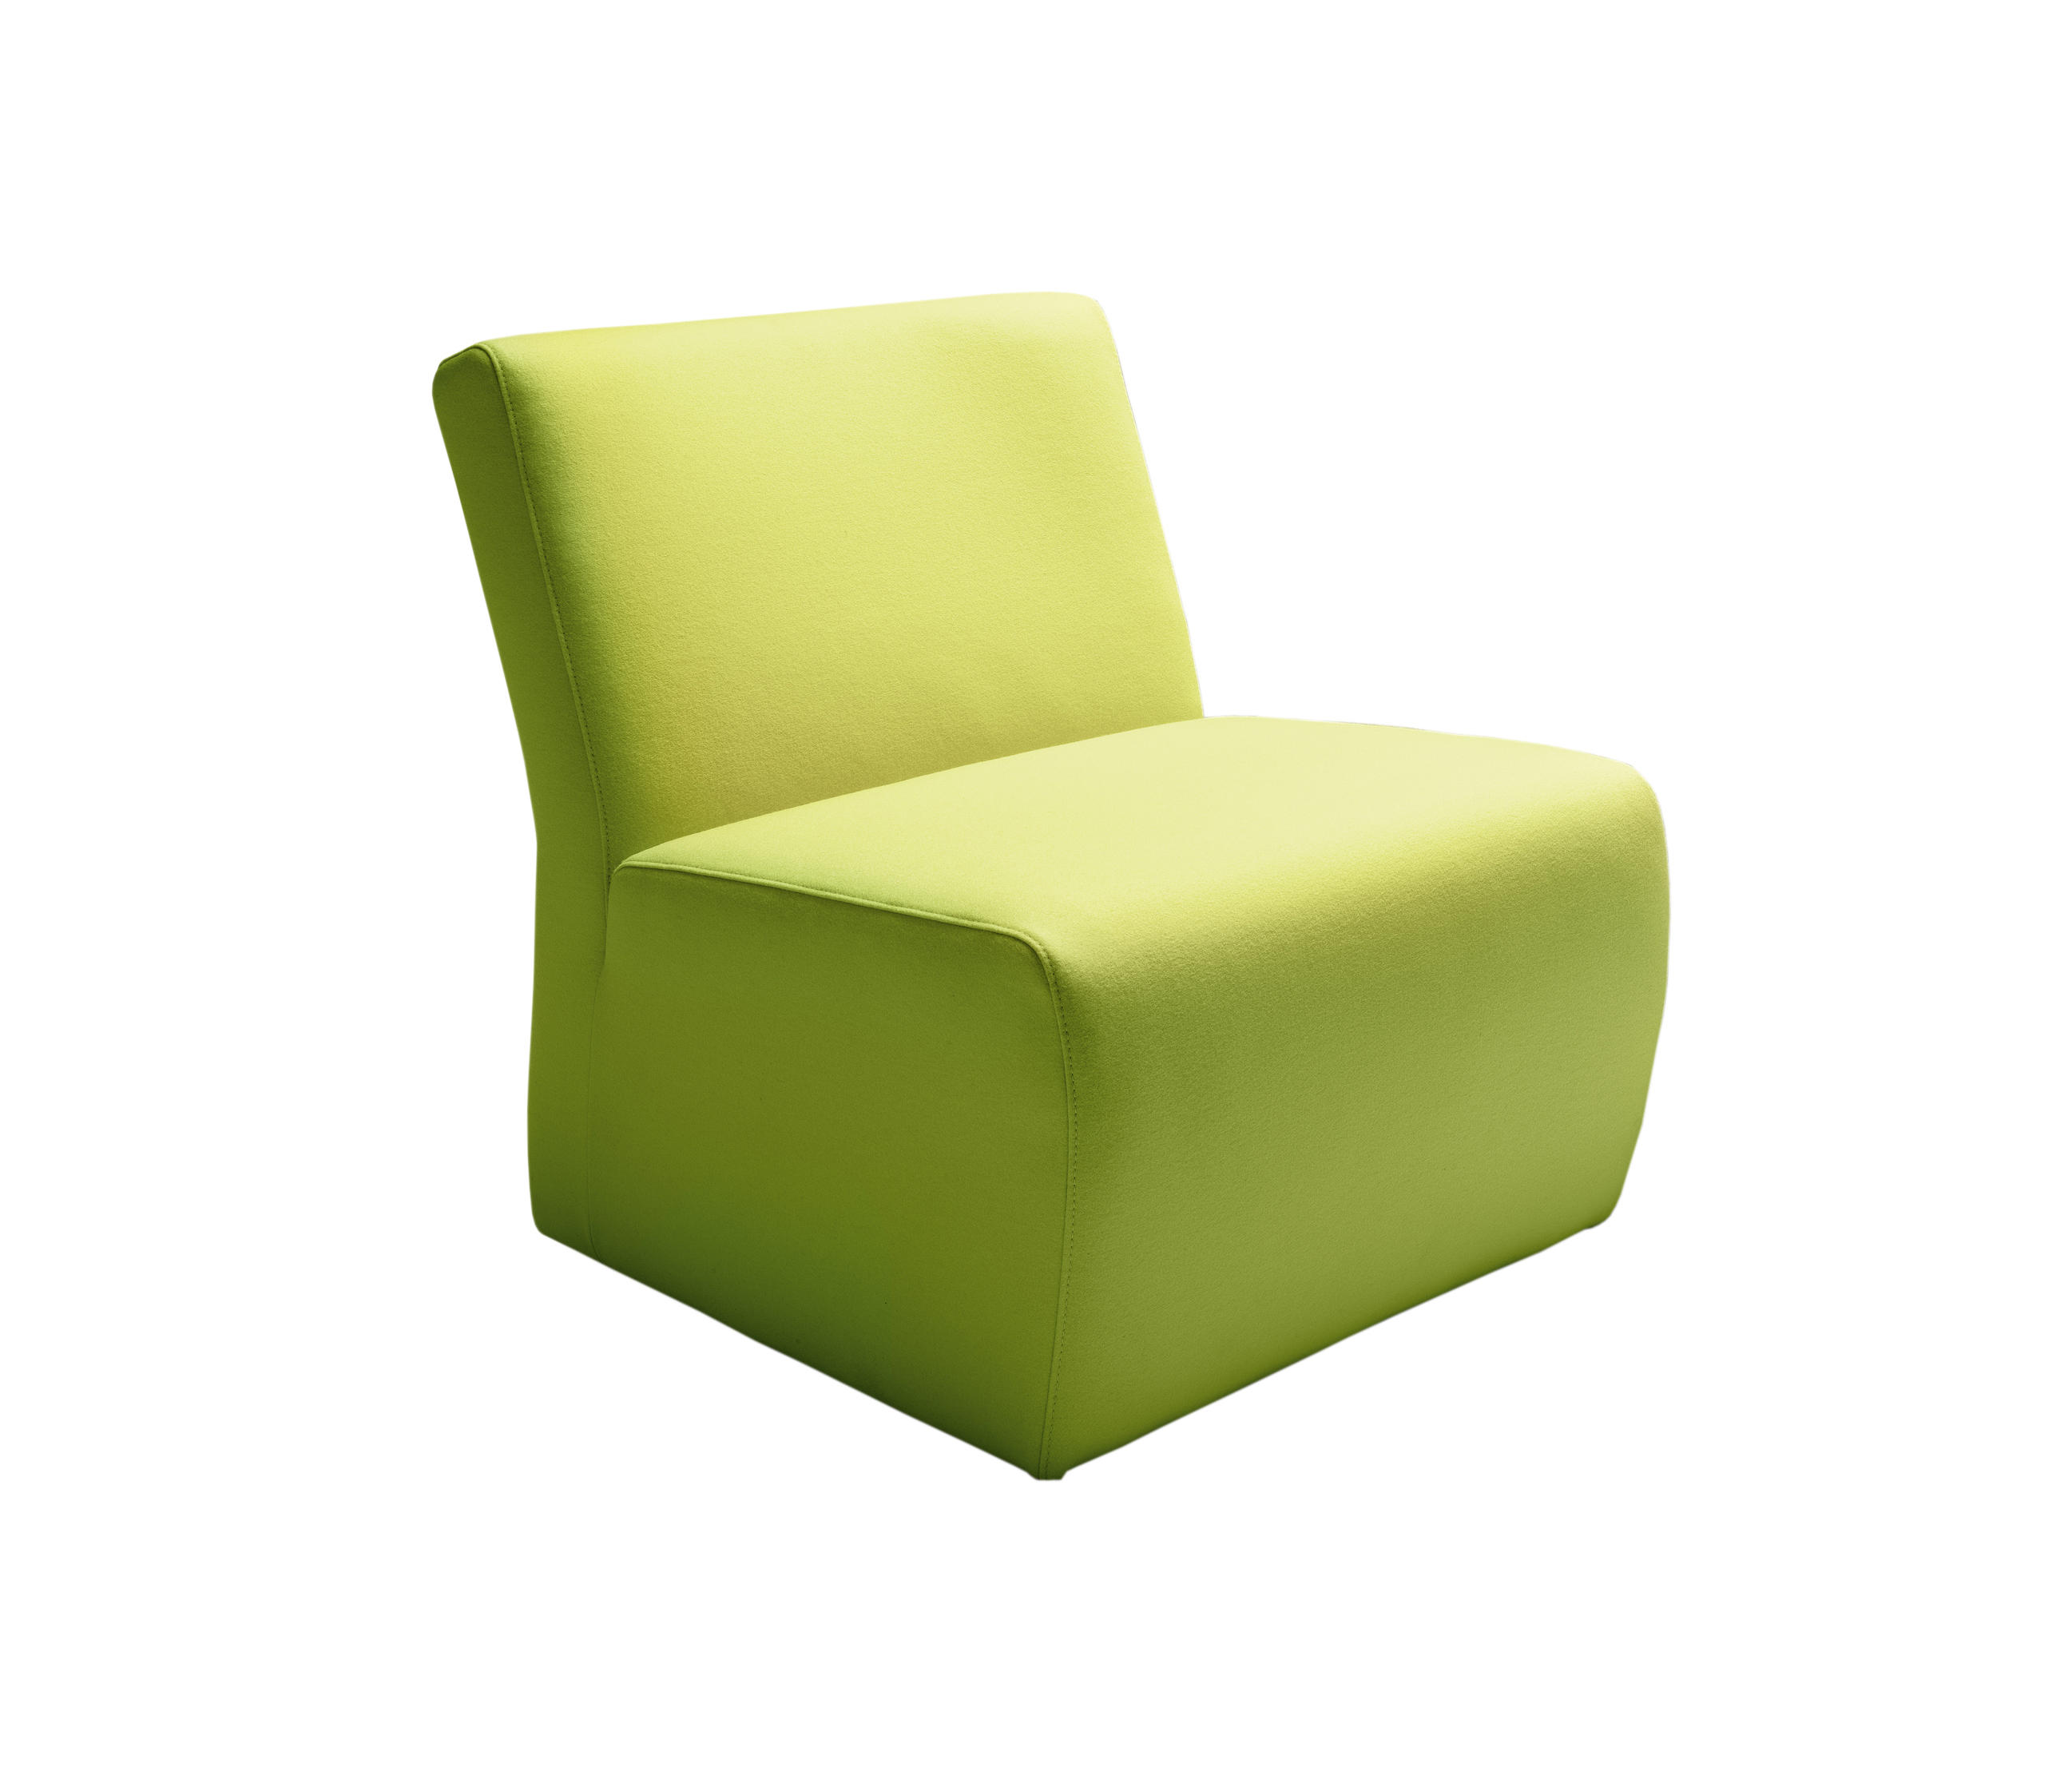 AHREND MILETO - Lounge chairs from Ahrend | Architonic